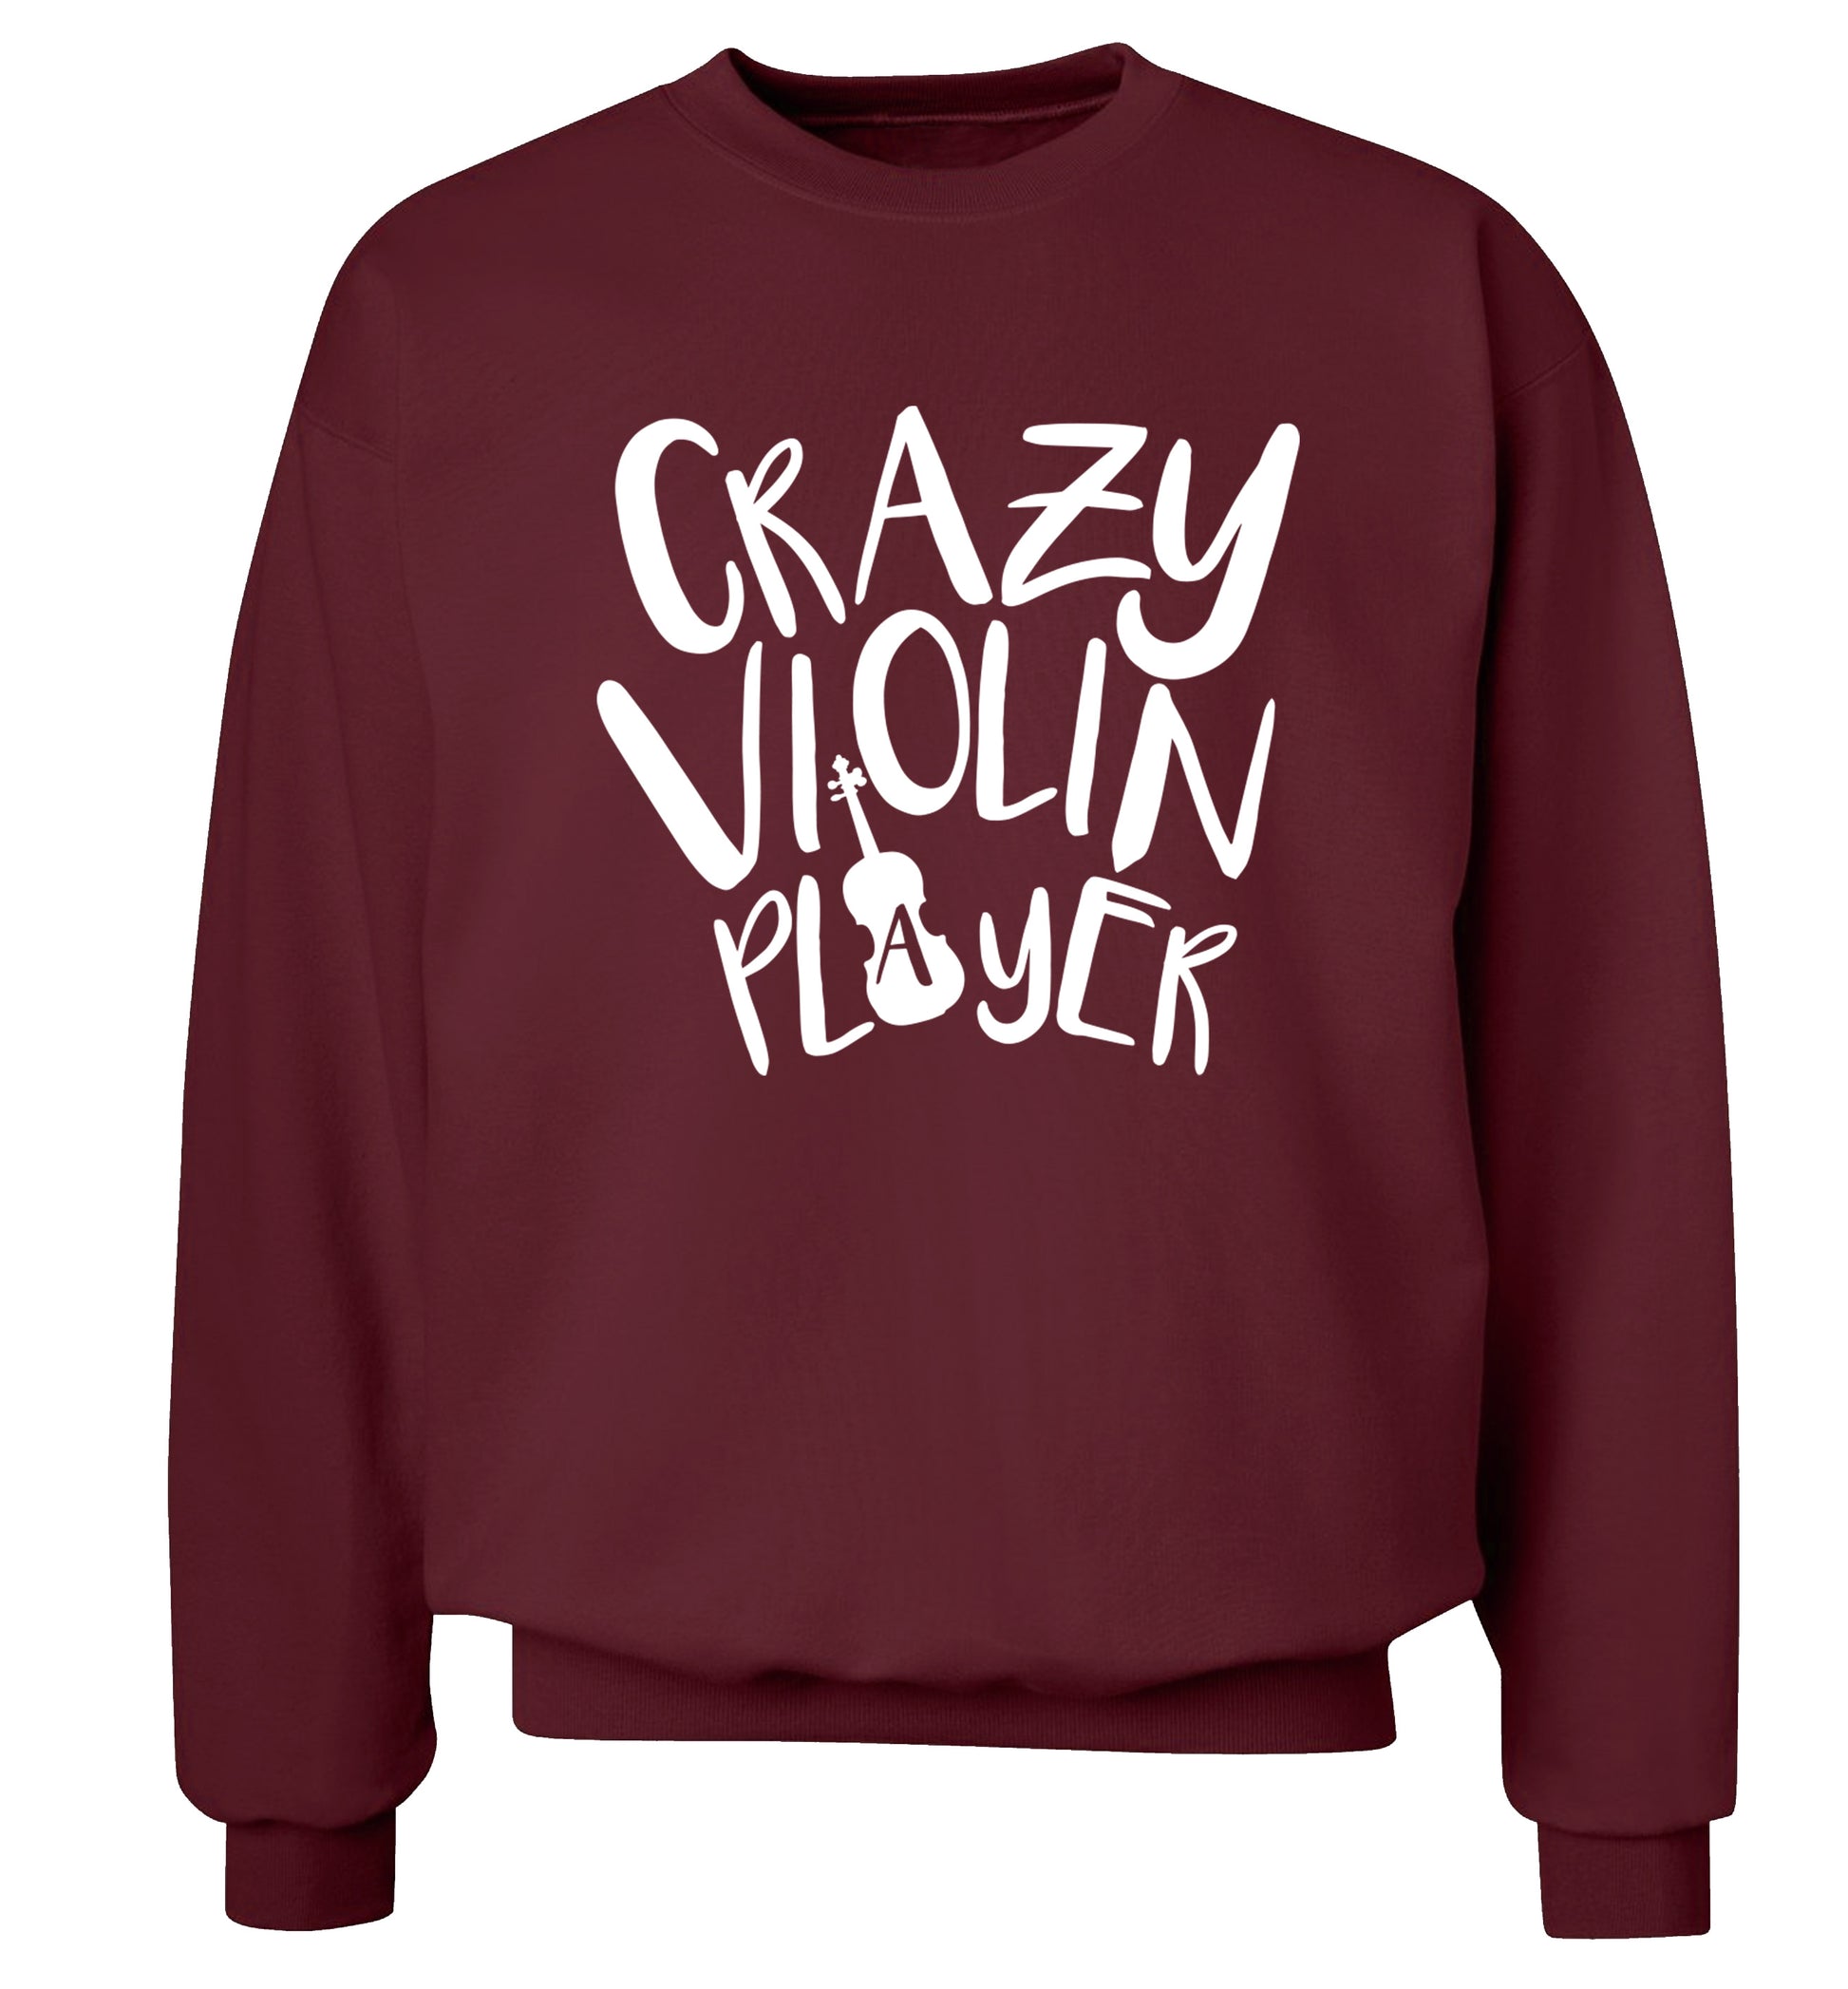 Crazy Violin Player Adult's unisex maroon Sweater 2XL